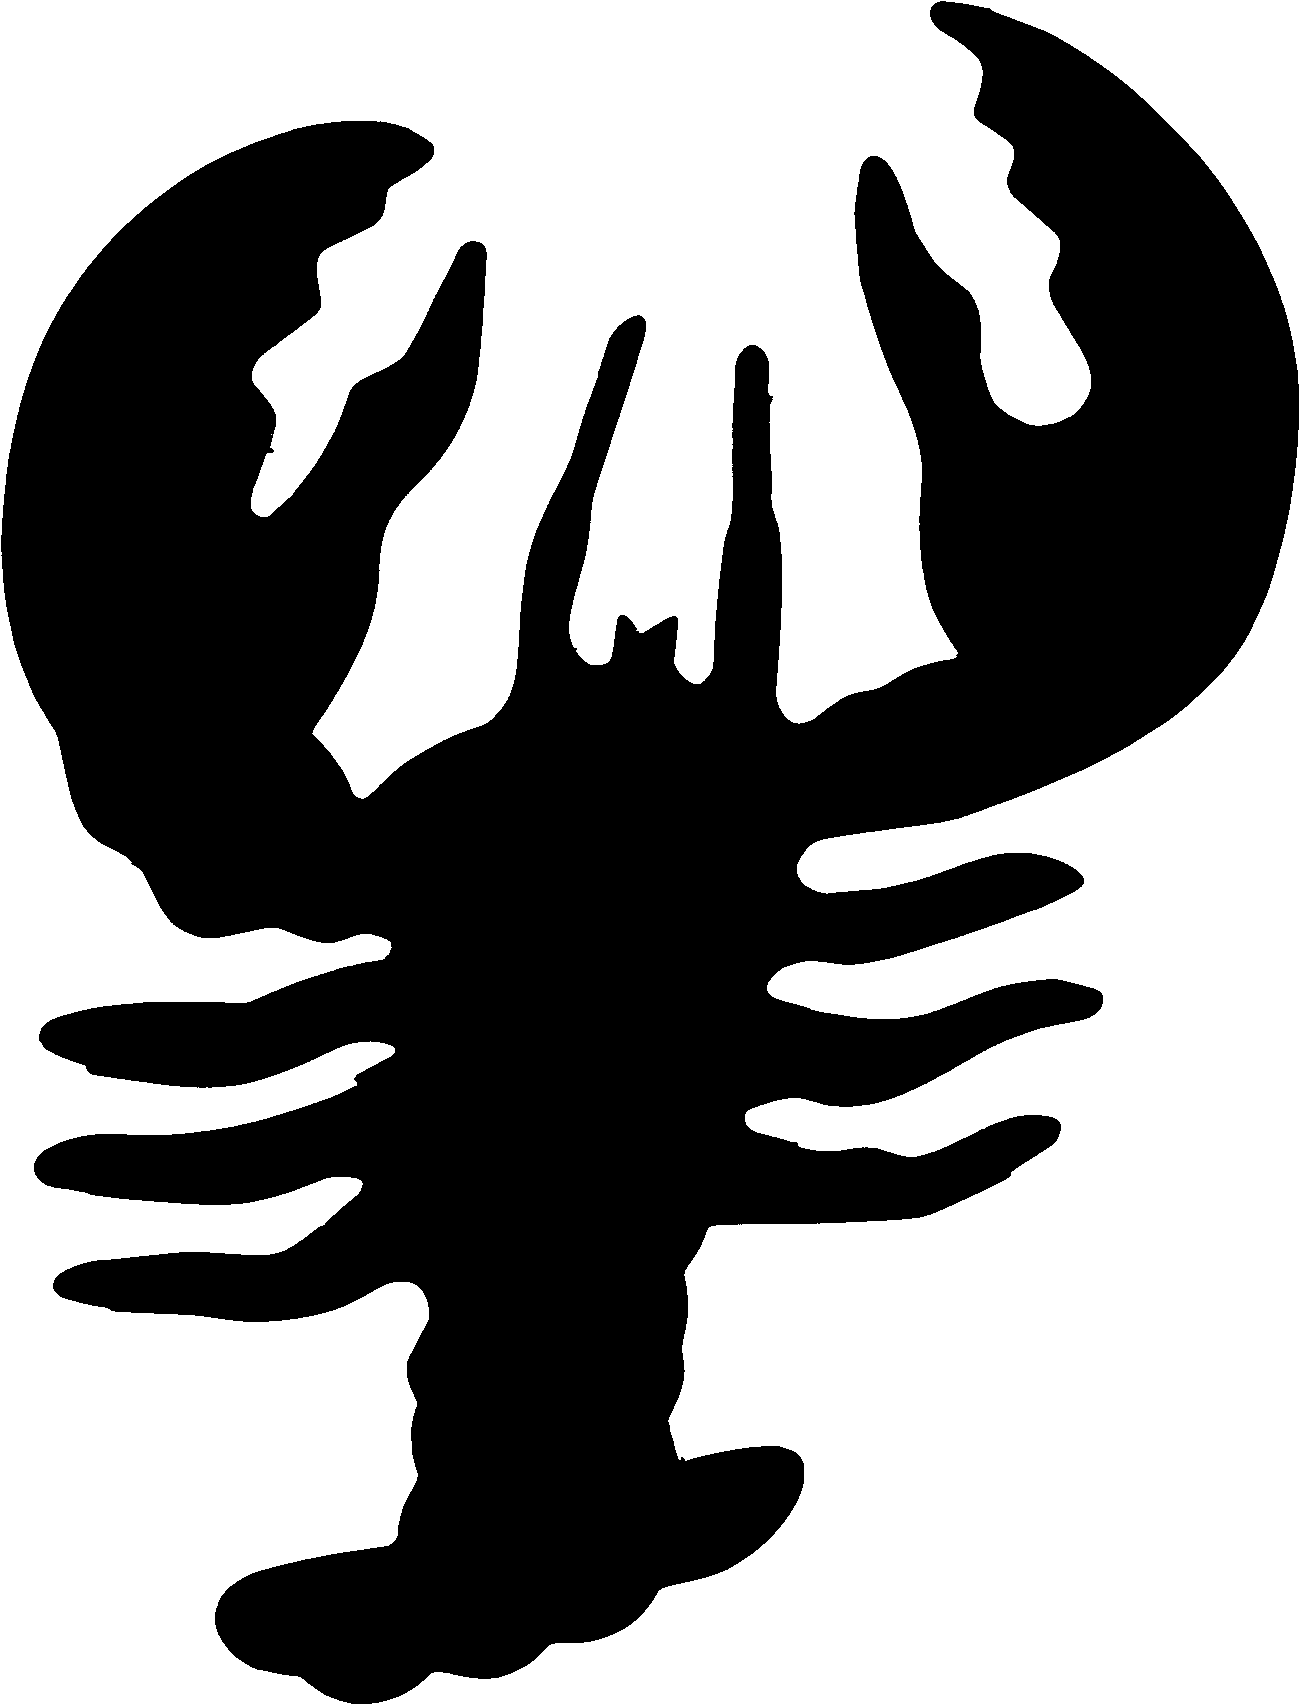 Lobster clip art free clipart images 3